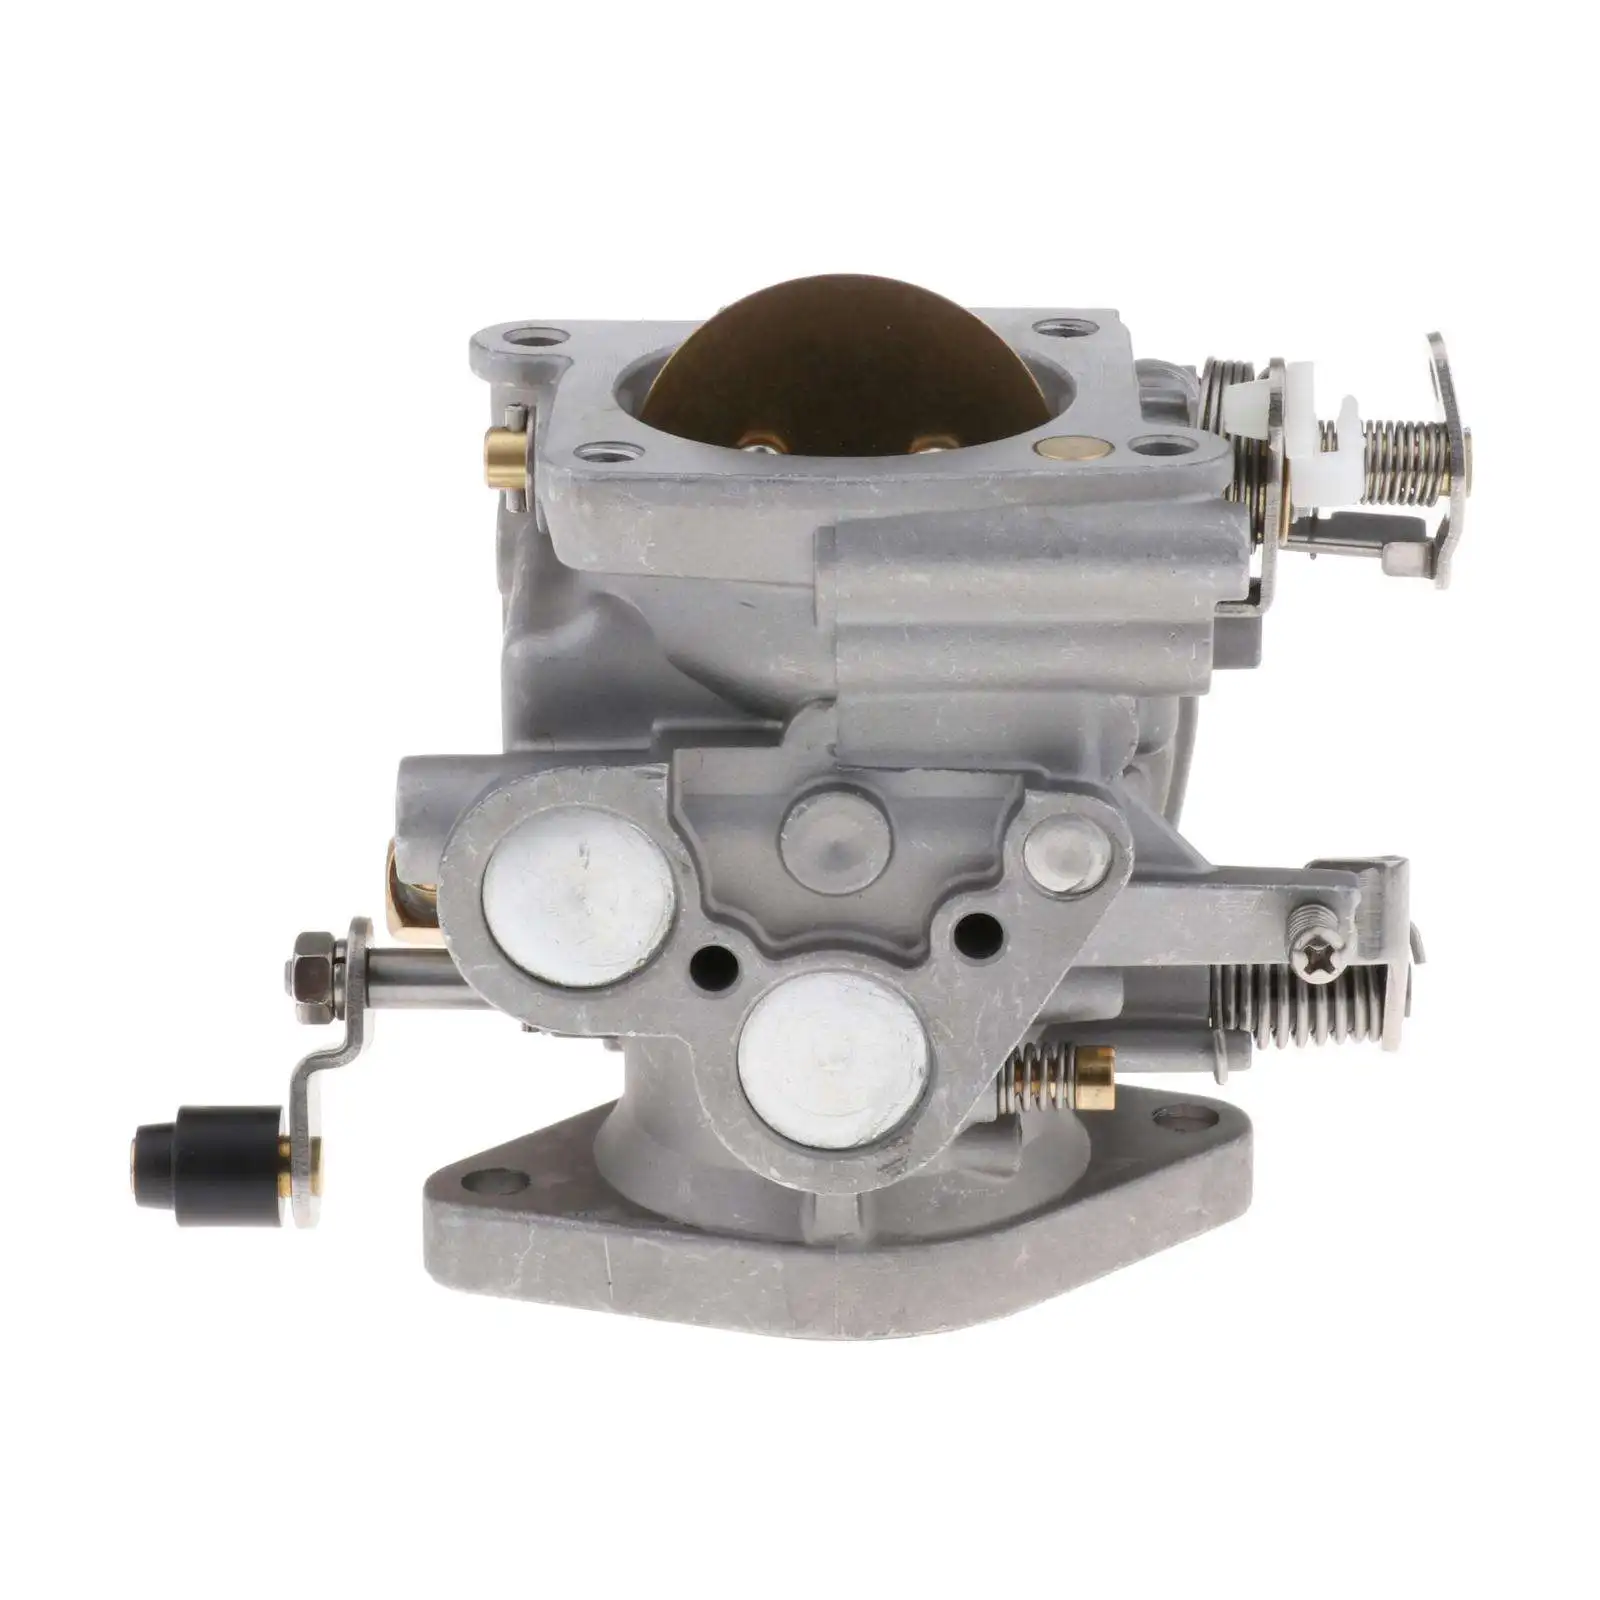 Carburetor Carb Assy For Tohatsu   25HP M25C 30HP M30A 25C3 30A4 2-Stroke 2 Cylinder Outboard Engine 3P0032000 3P0032000M